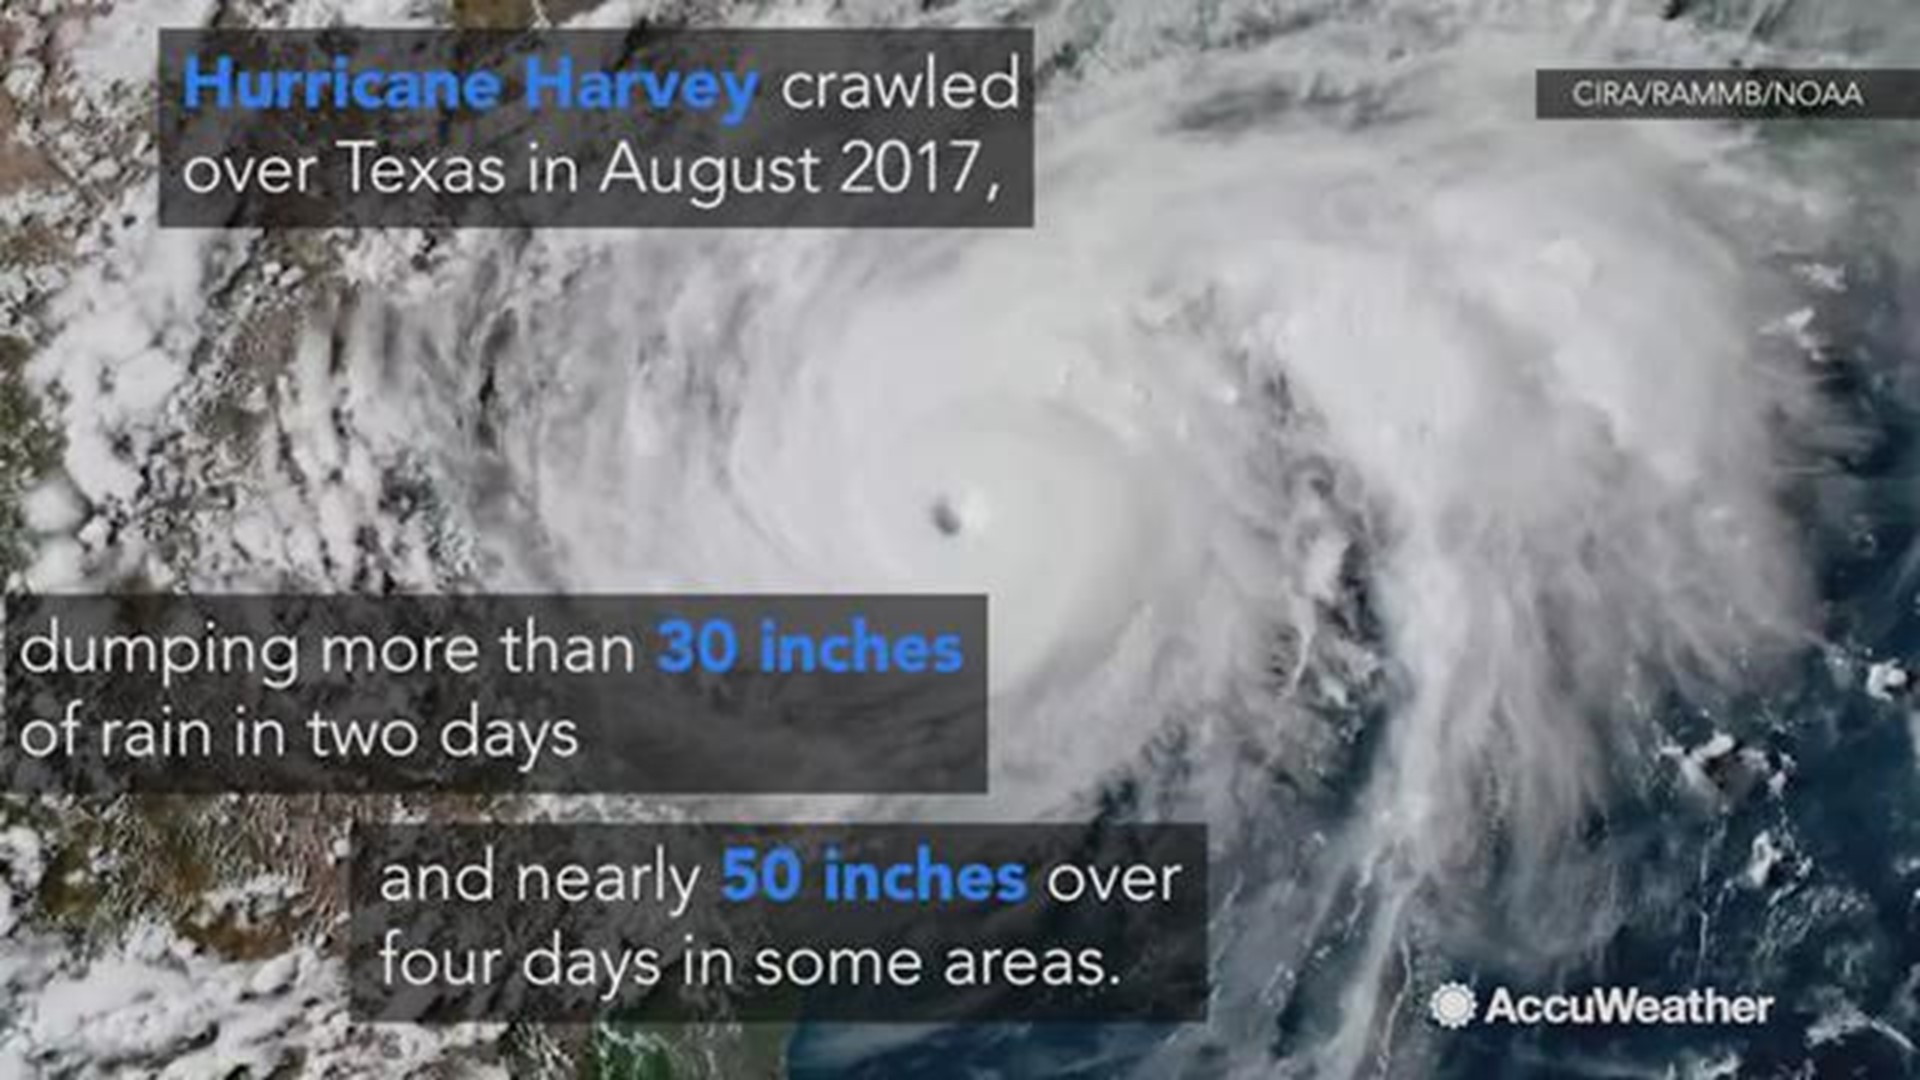 Hurricane Harvey slammed into the Gulf Coast as a category 4 storm in August 2017. The storm caused catastrophic damages along the Texas coast, dropping record-breaking rainfall on the region.